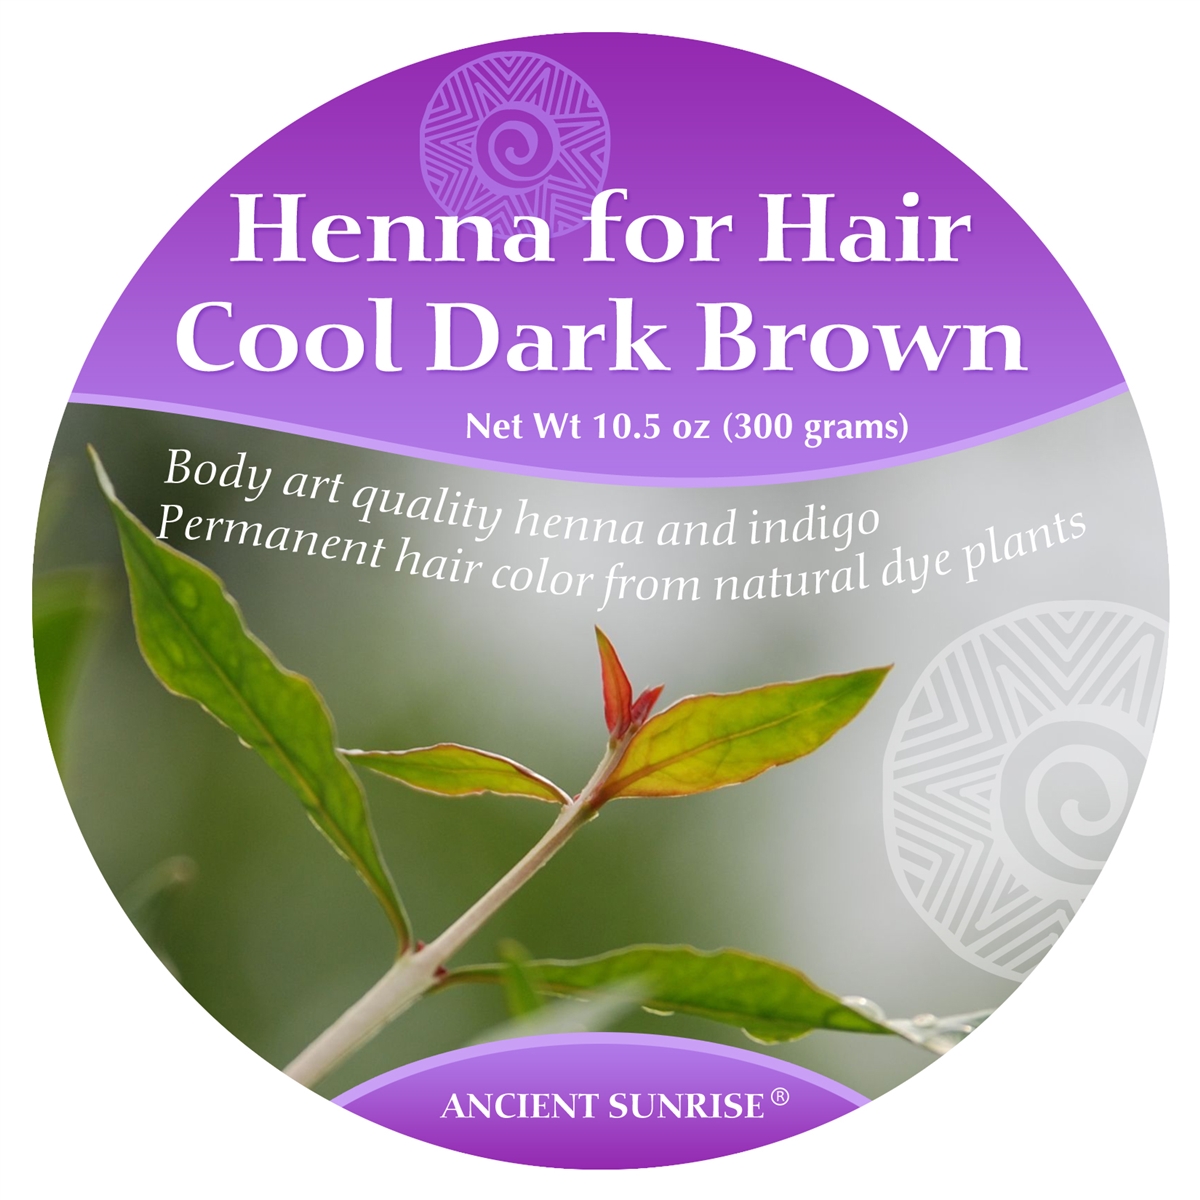 Sample Henna For Hair Cool Dark Brown Kit, natural beauty product, clean  beauty 